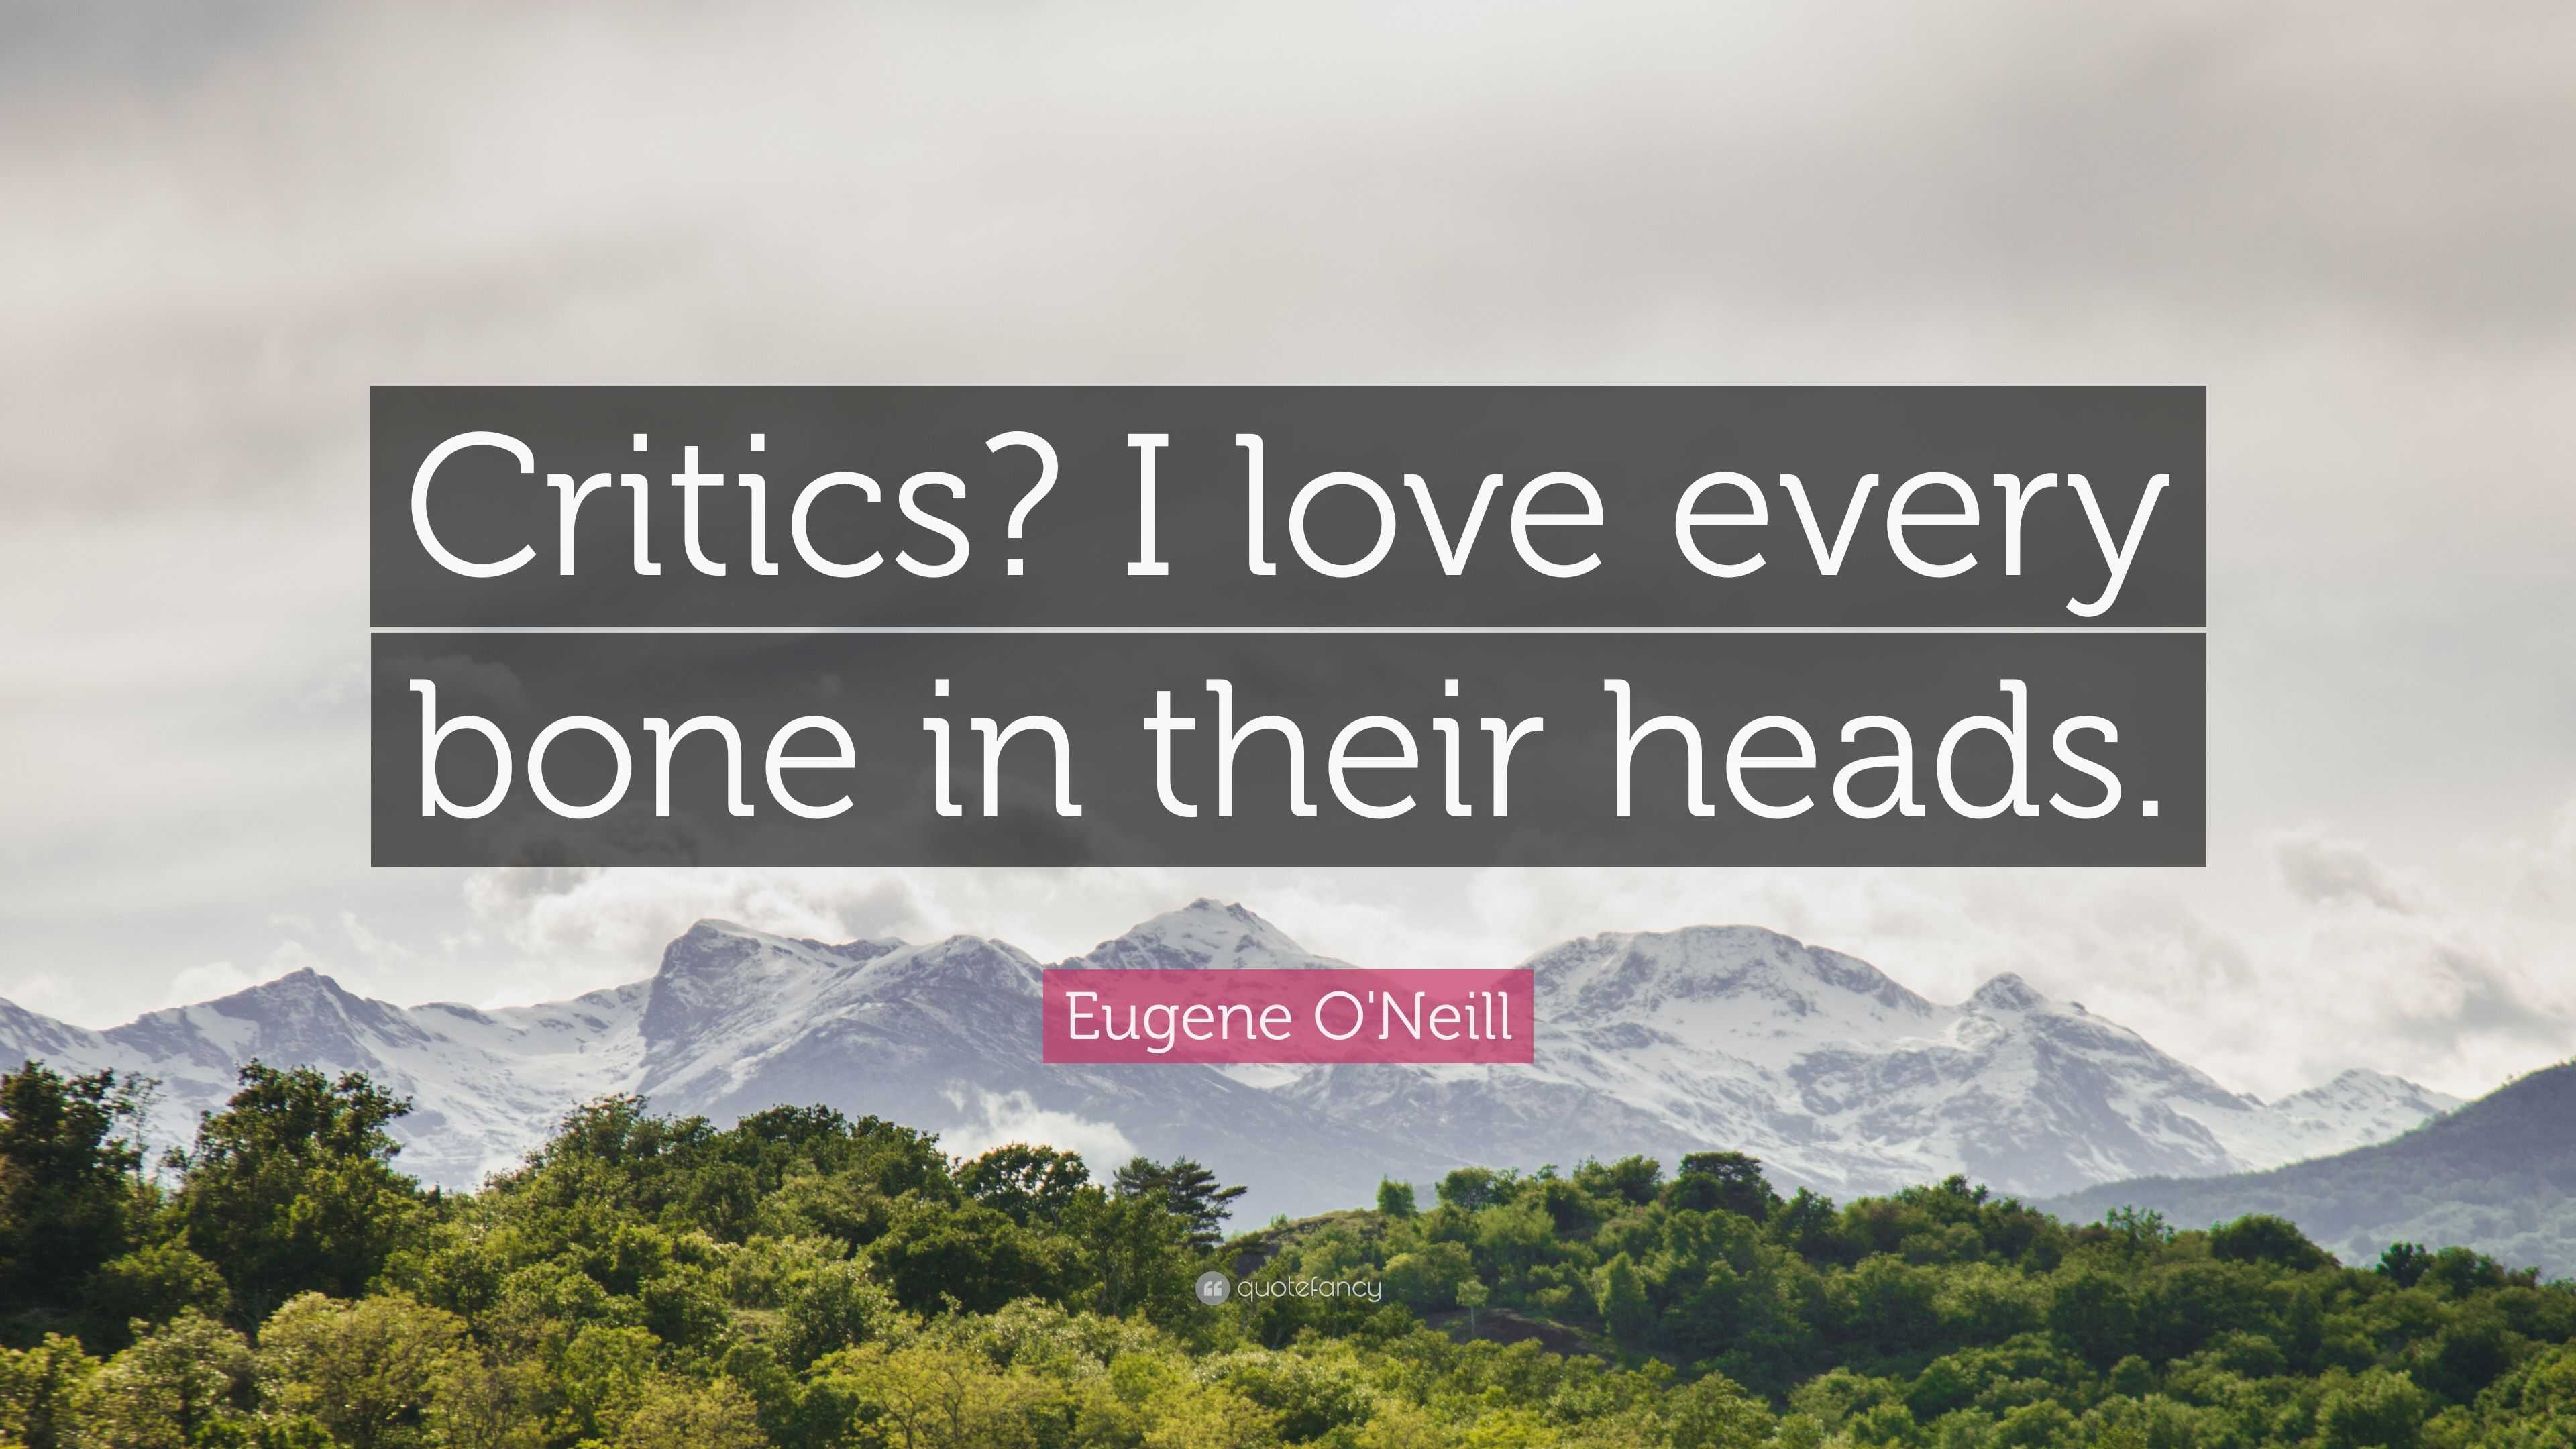 Eugene O'Neill Quote: “Critics? I love every bone in their heads.”